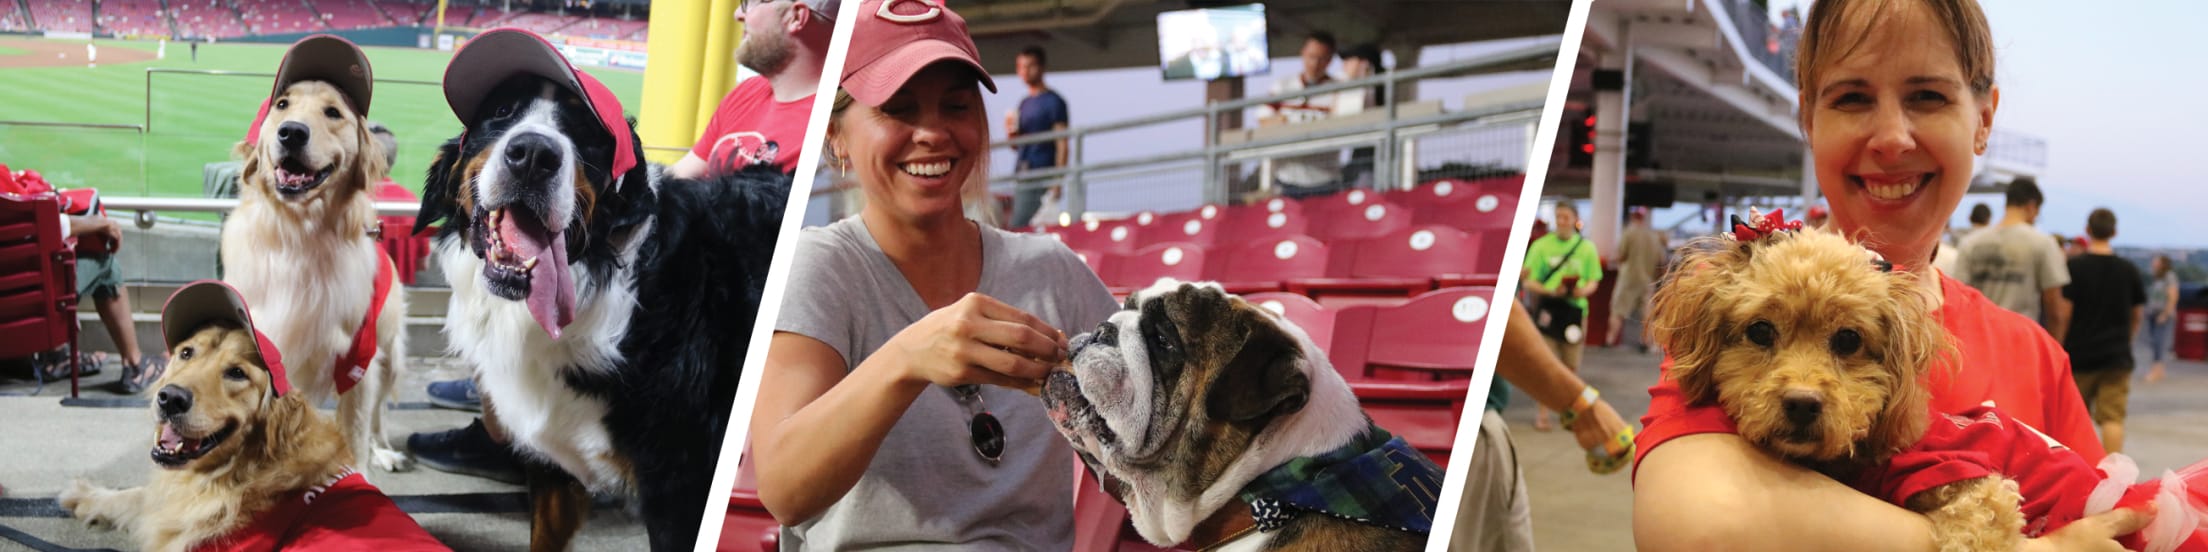 BringFido to Bark at the Park with the Cincinnati Reds